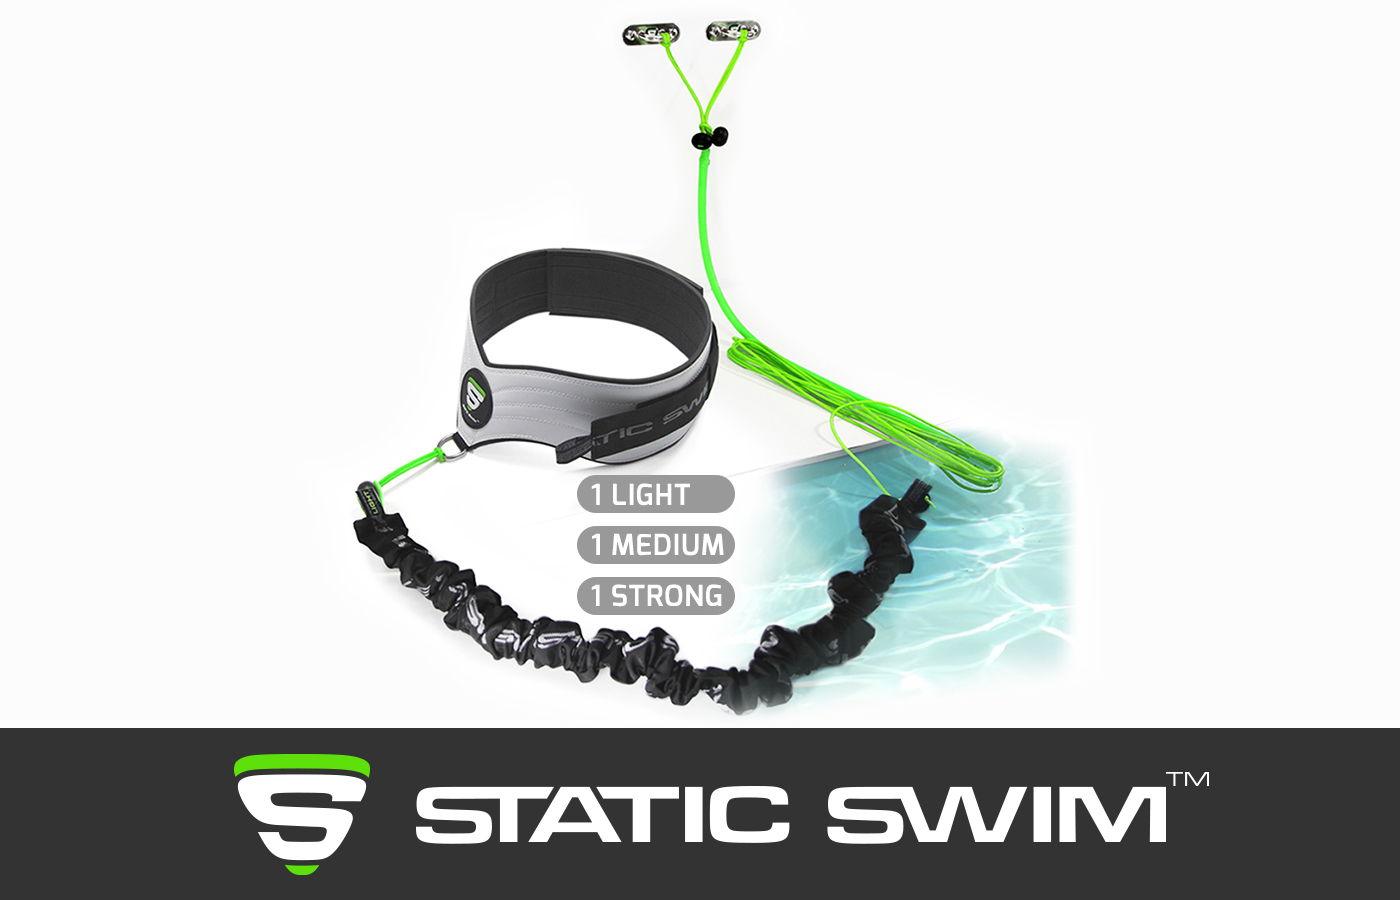 STATIC SWIM™'s swimming harness and resistance band with Wall fixing